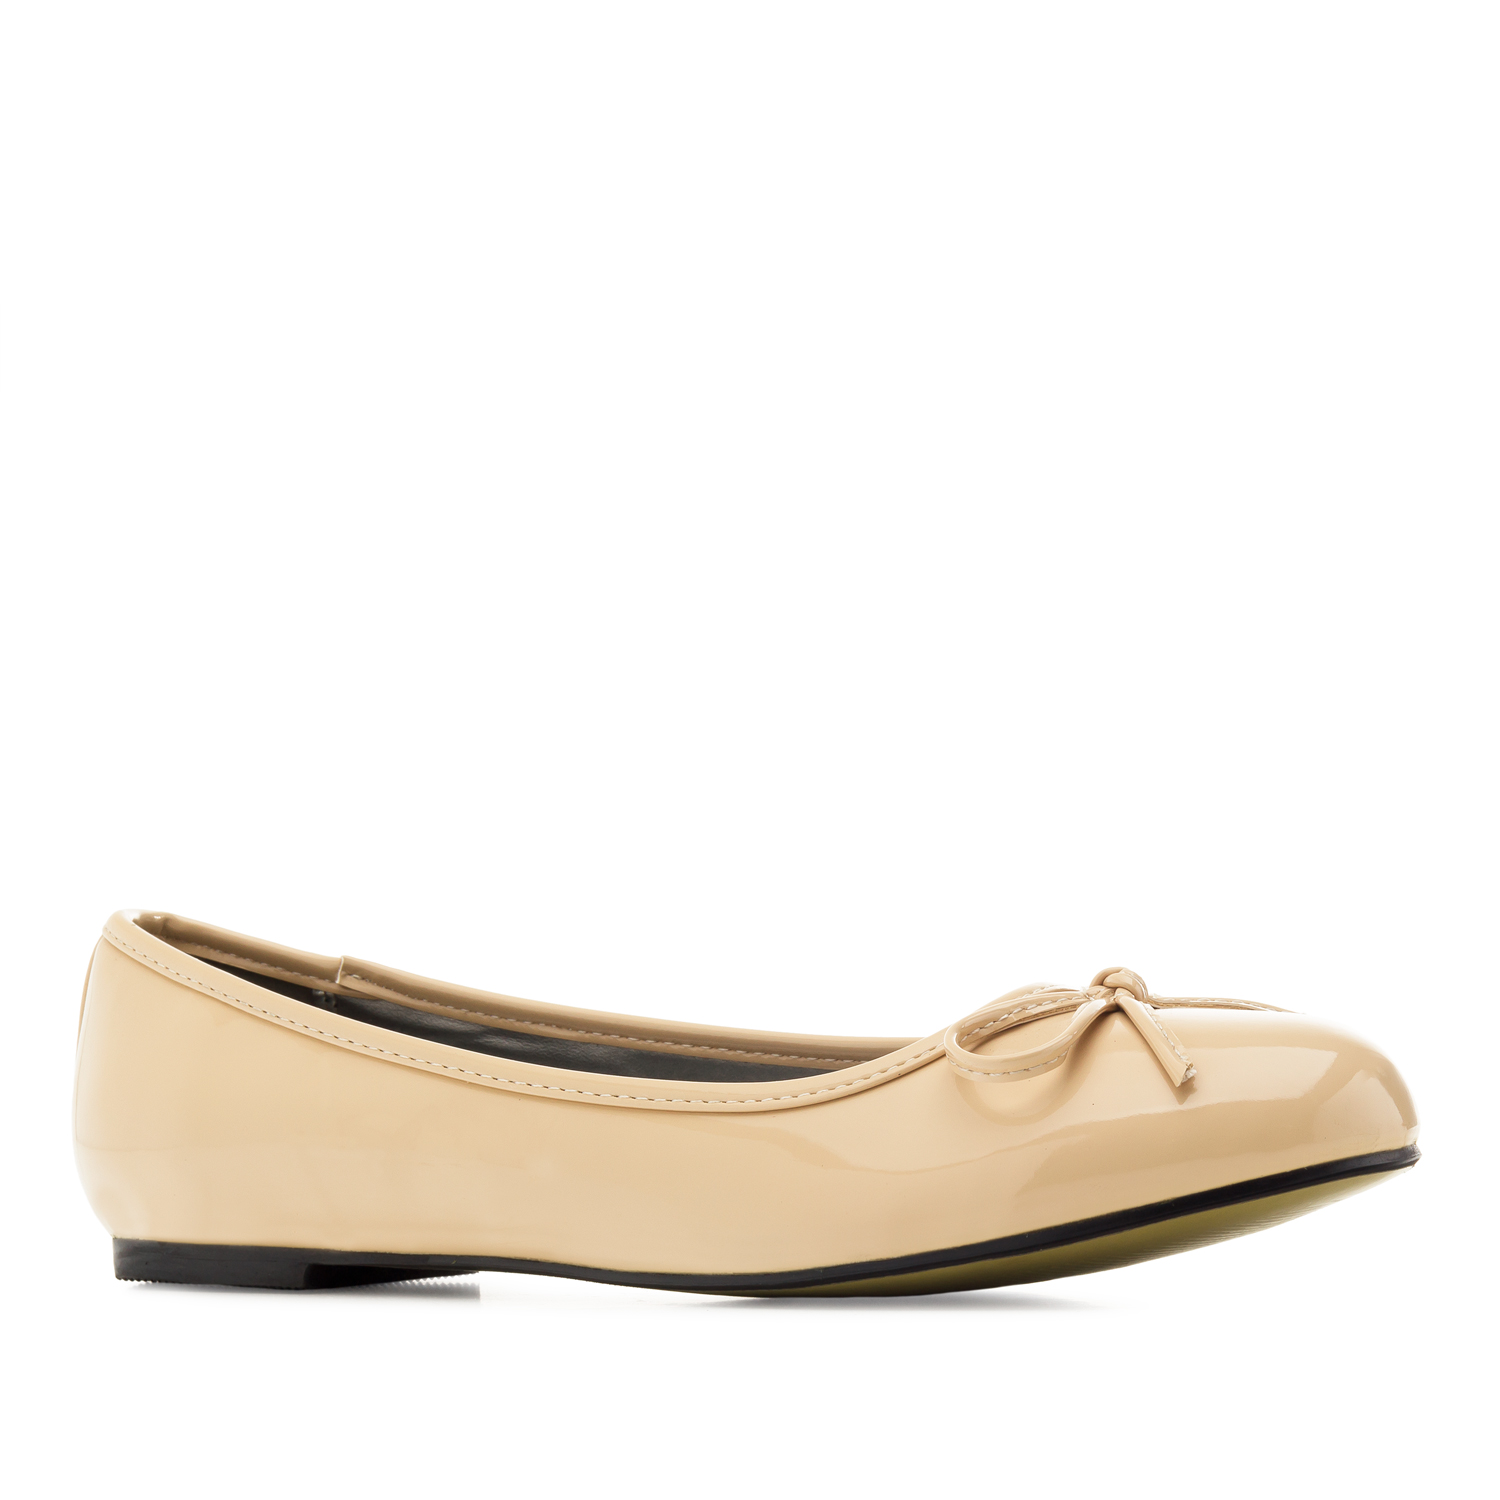 Beige faux-patent leather Ballerinas with bow. 